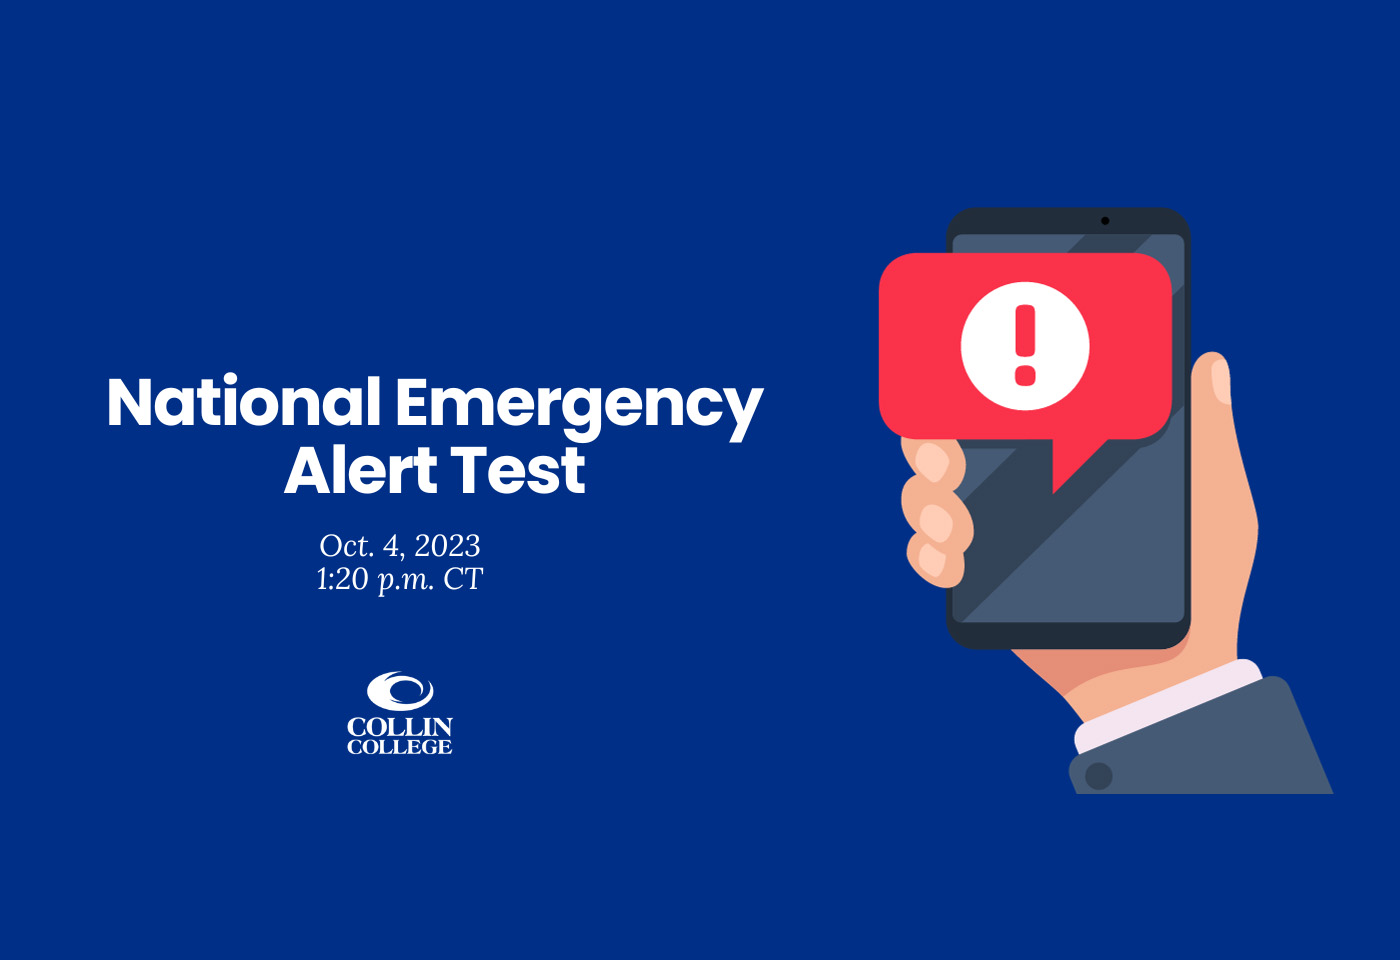 National Emergency Alert Test on Oct. 4, 2023 at 1:20 p.m. Central Time